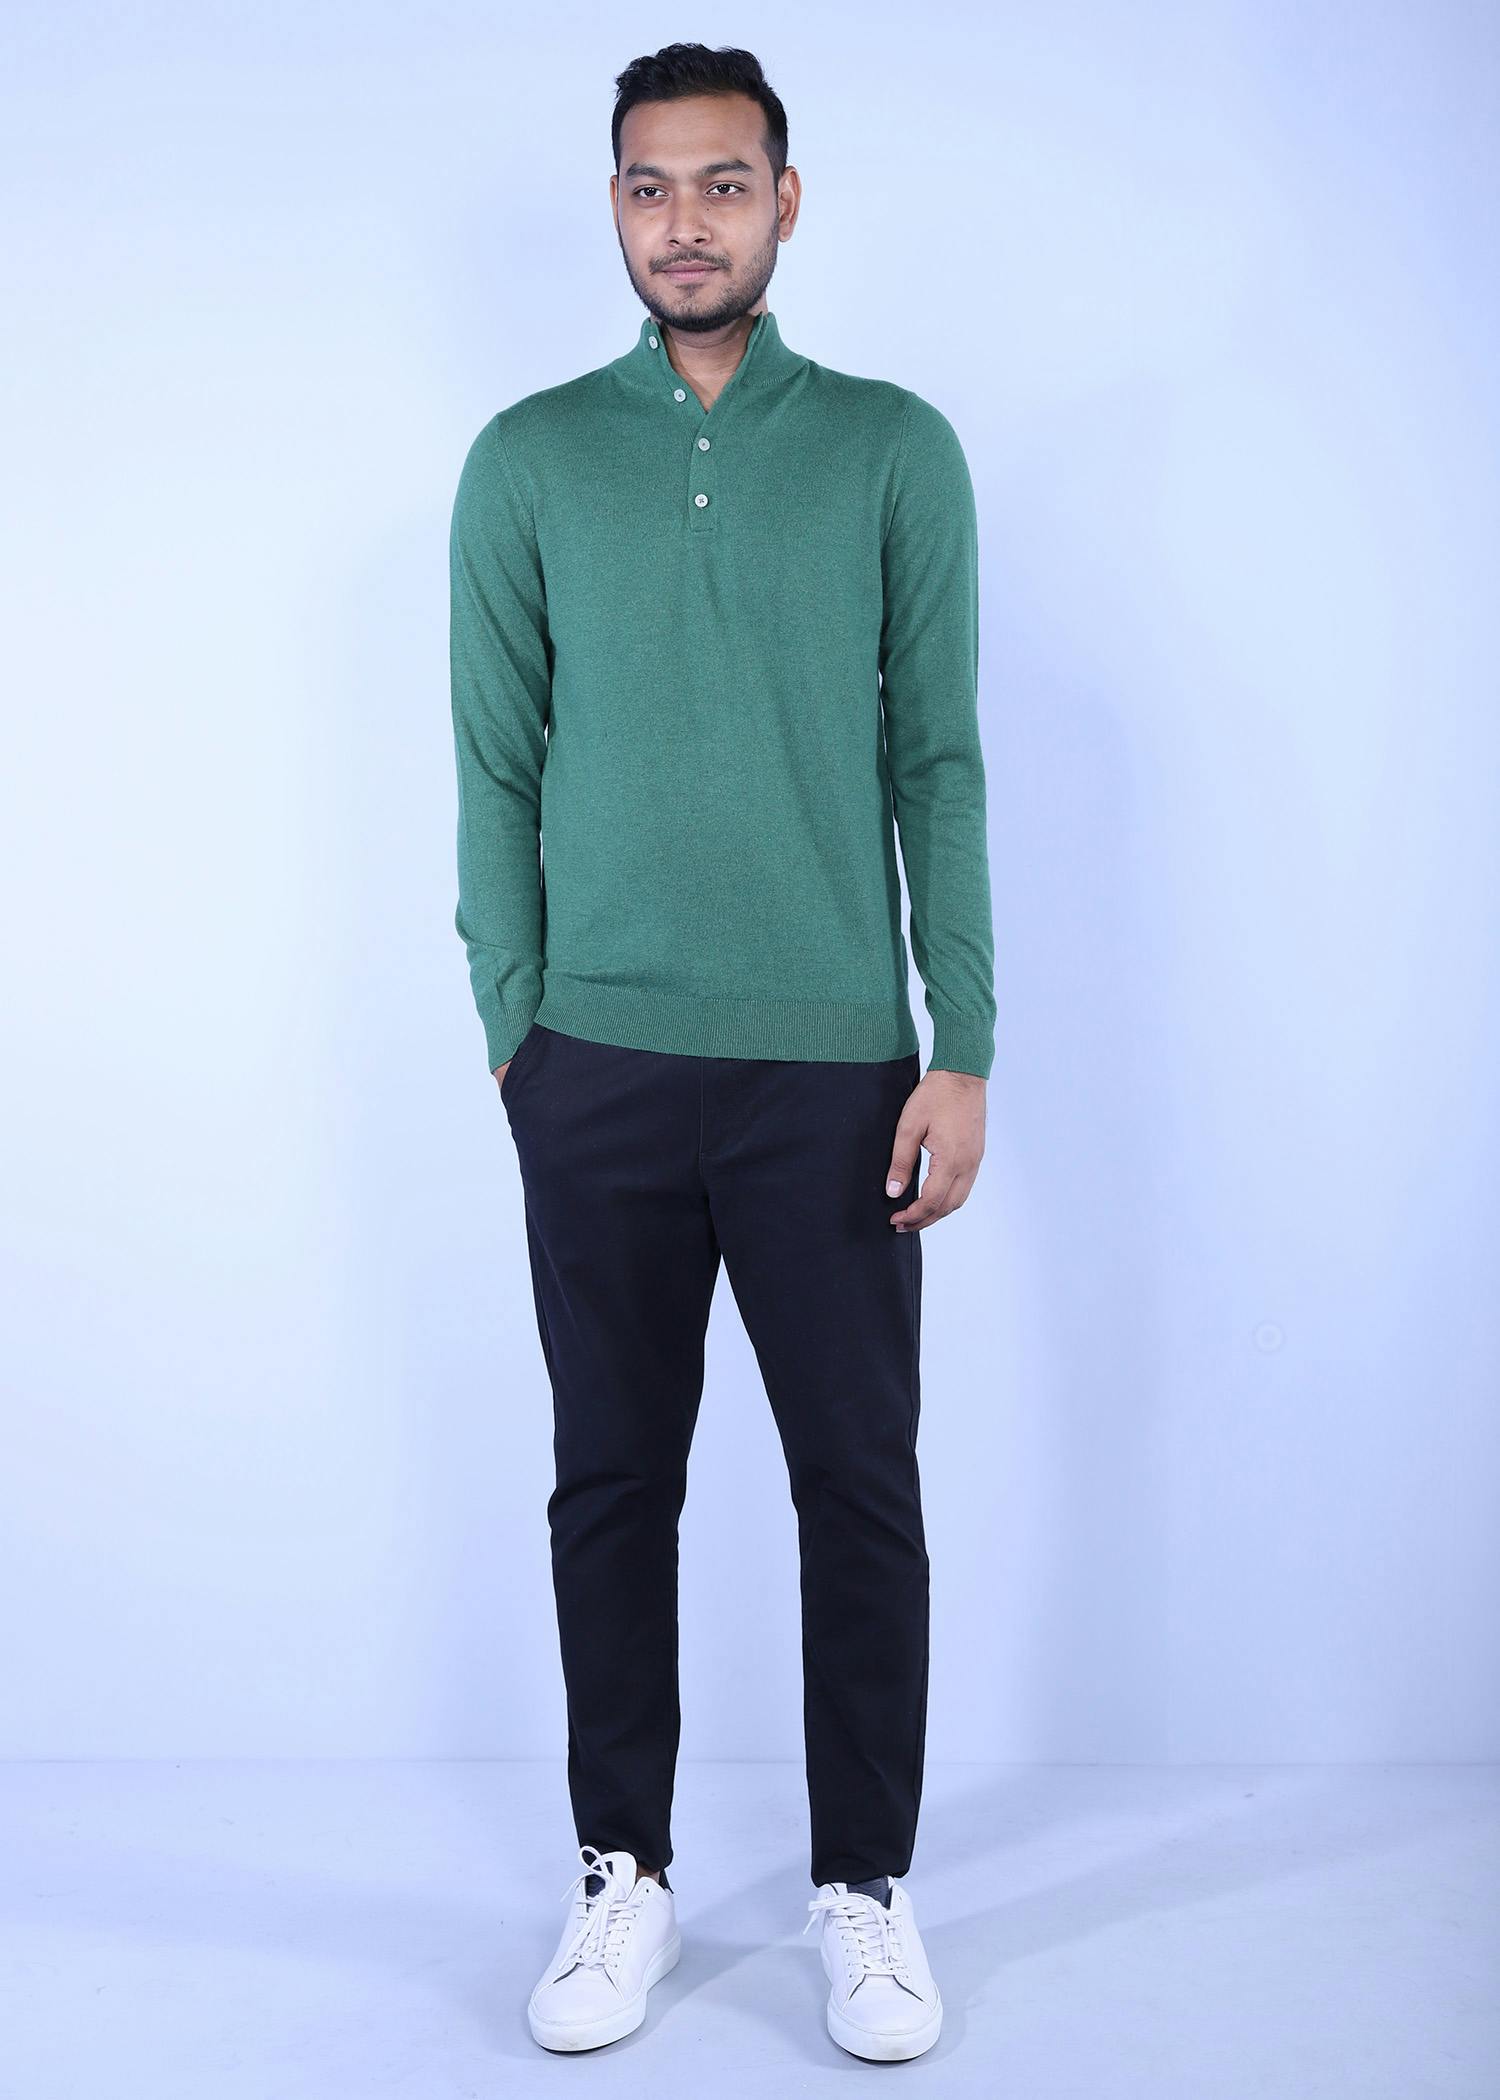 hornero i sweater green color full front view